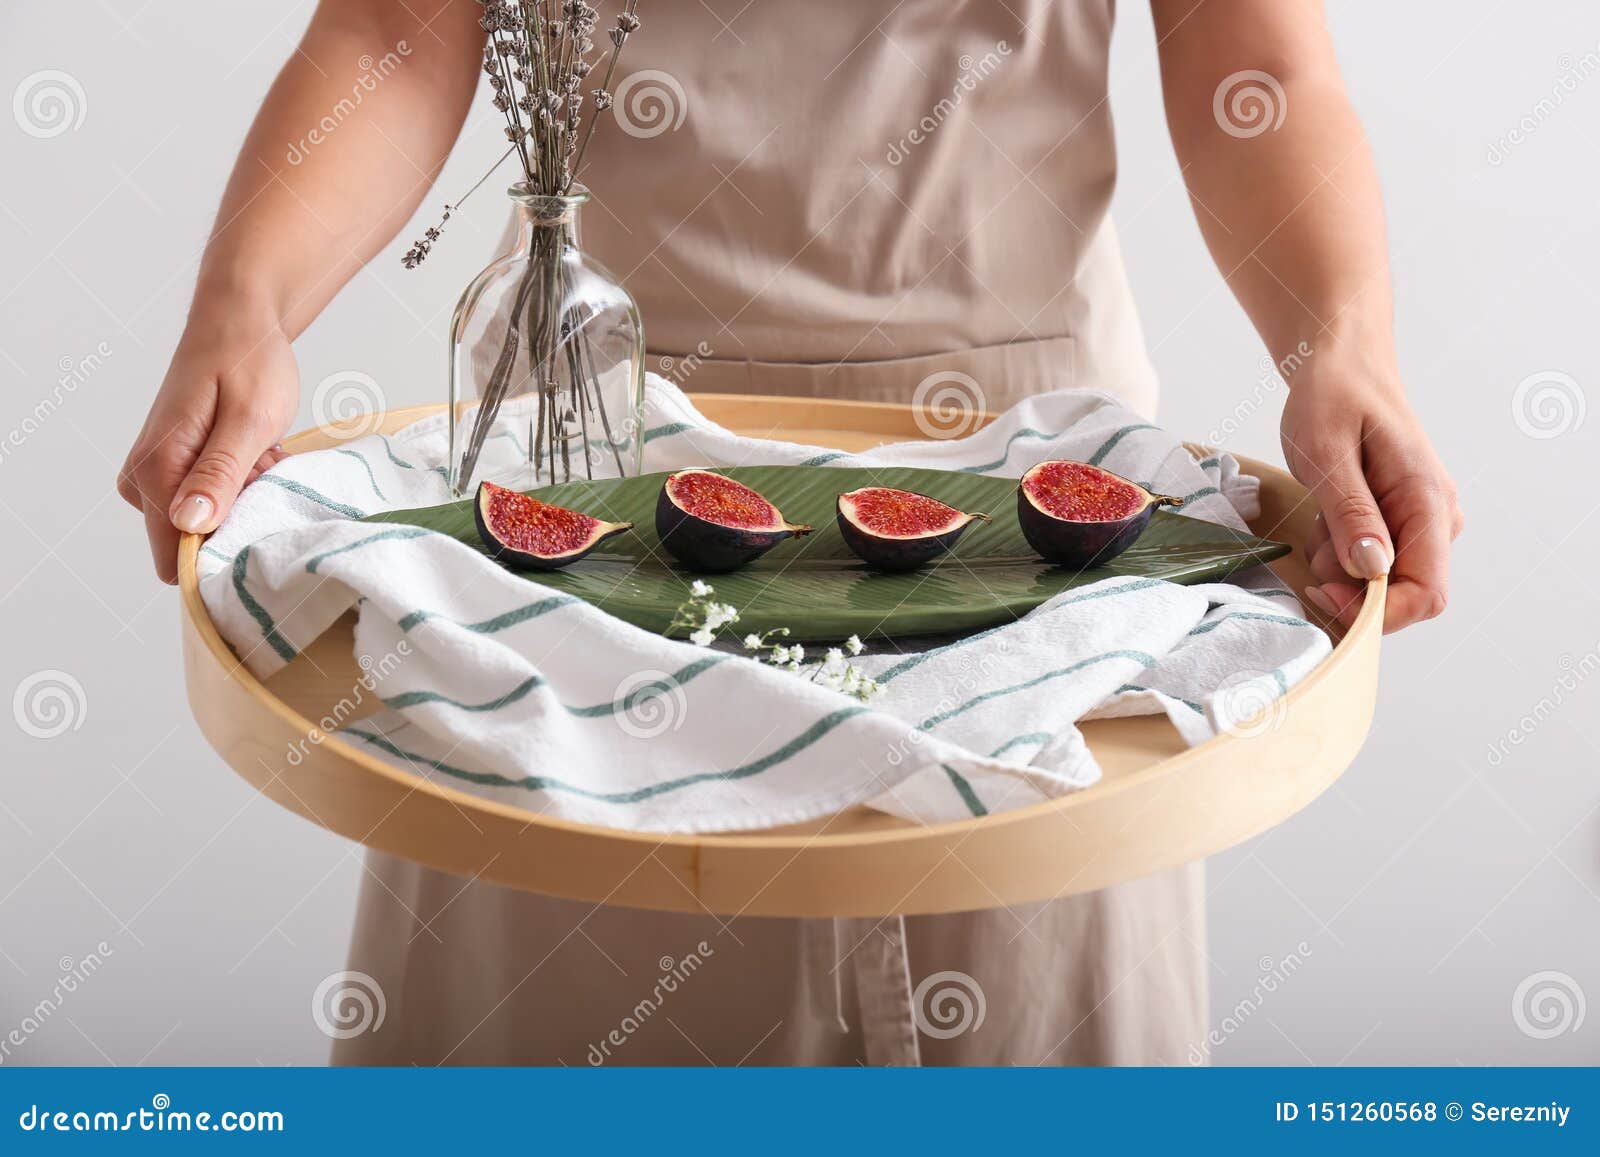 https://thumbs.dreamstime.com/z/woman-holding-tray-cut-ripe-figs-om-light-background-woman-holding-tray-cut-ripe-figs-om-light-background-151260568.jpg